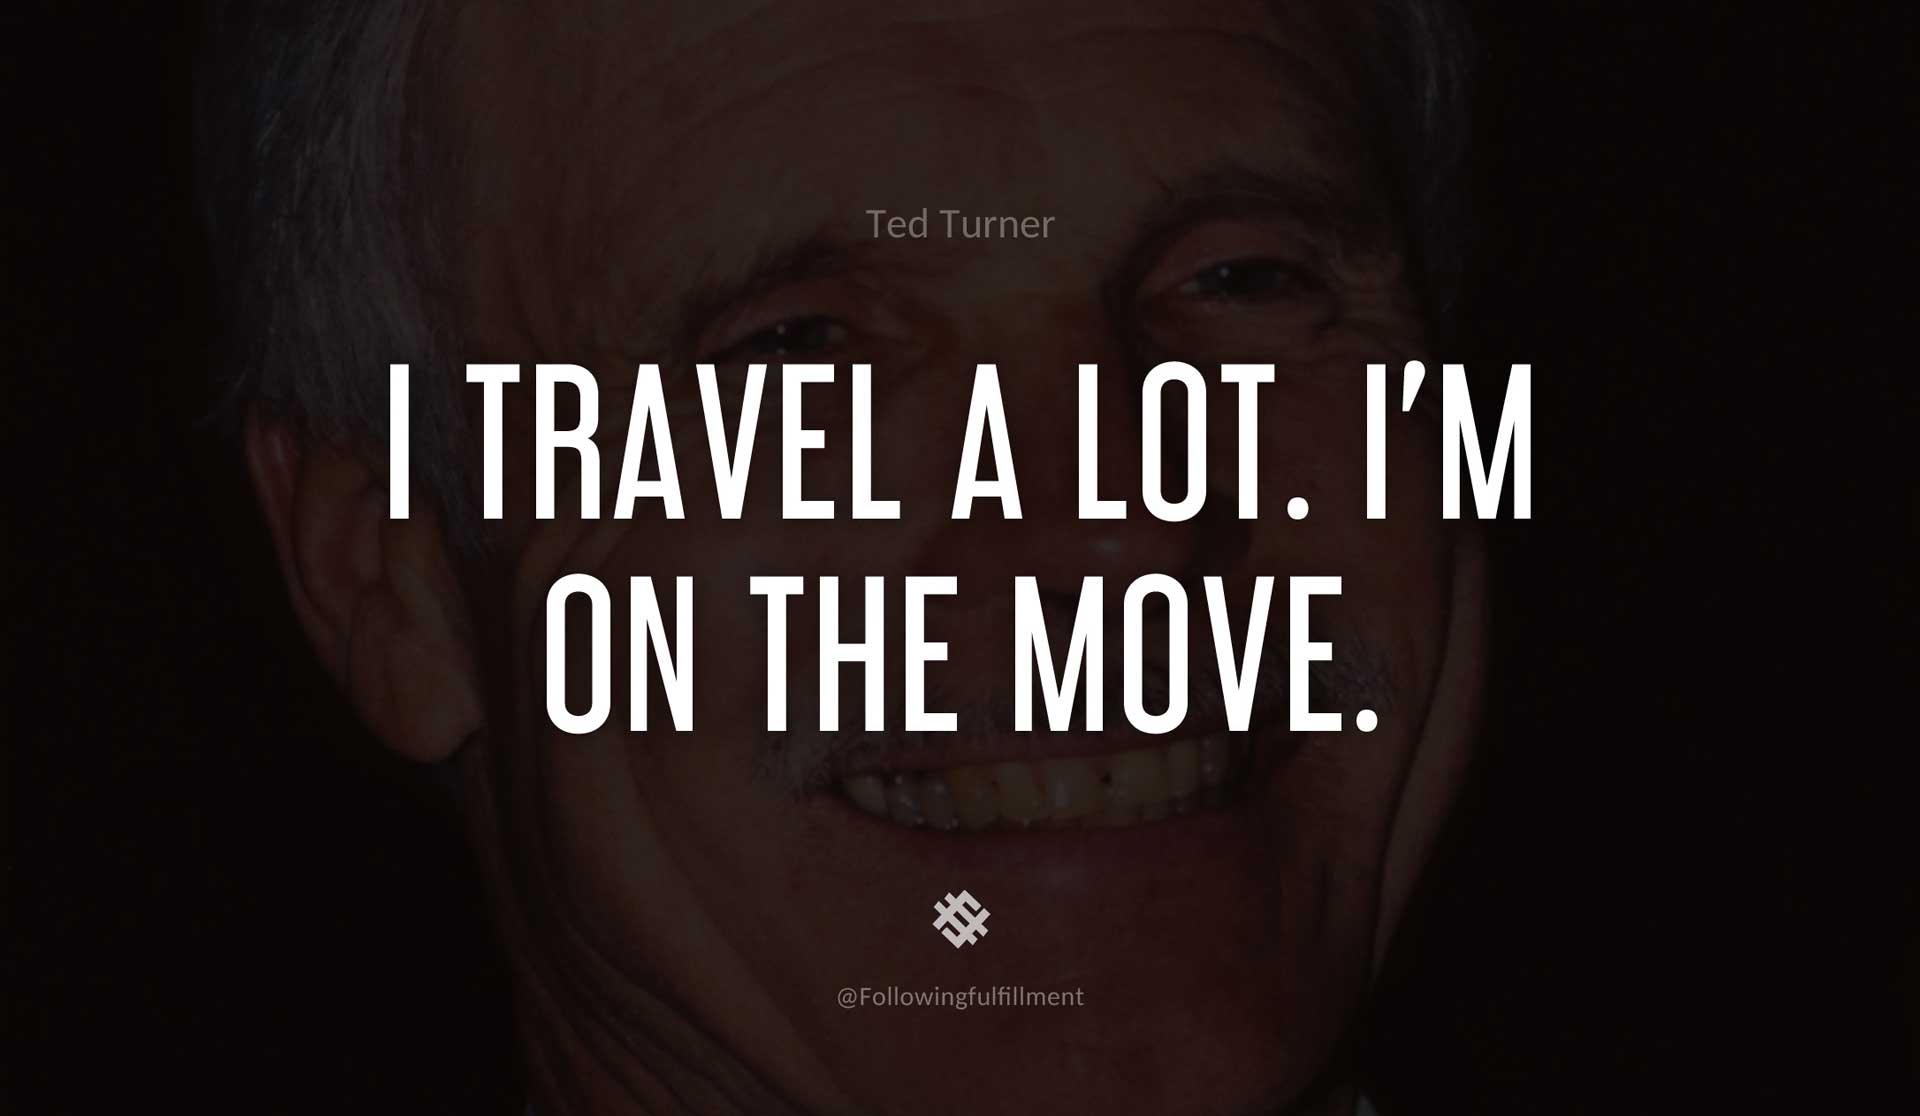 I-travel-a-lot.-I'm-on-the-move.-TED-TURNER-Quote.jpg